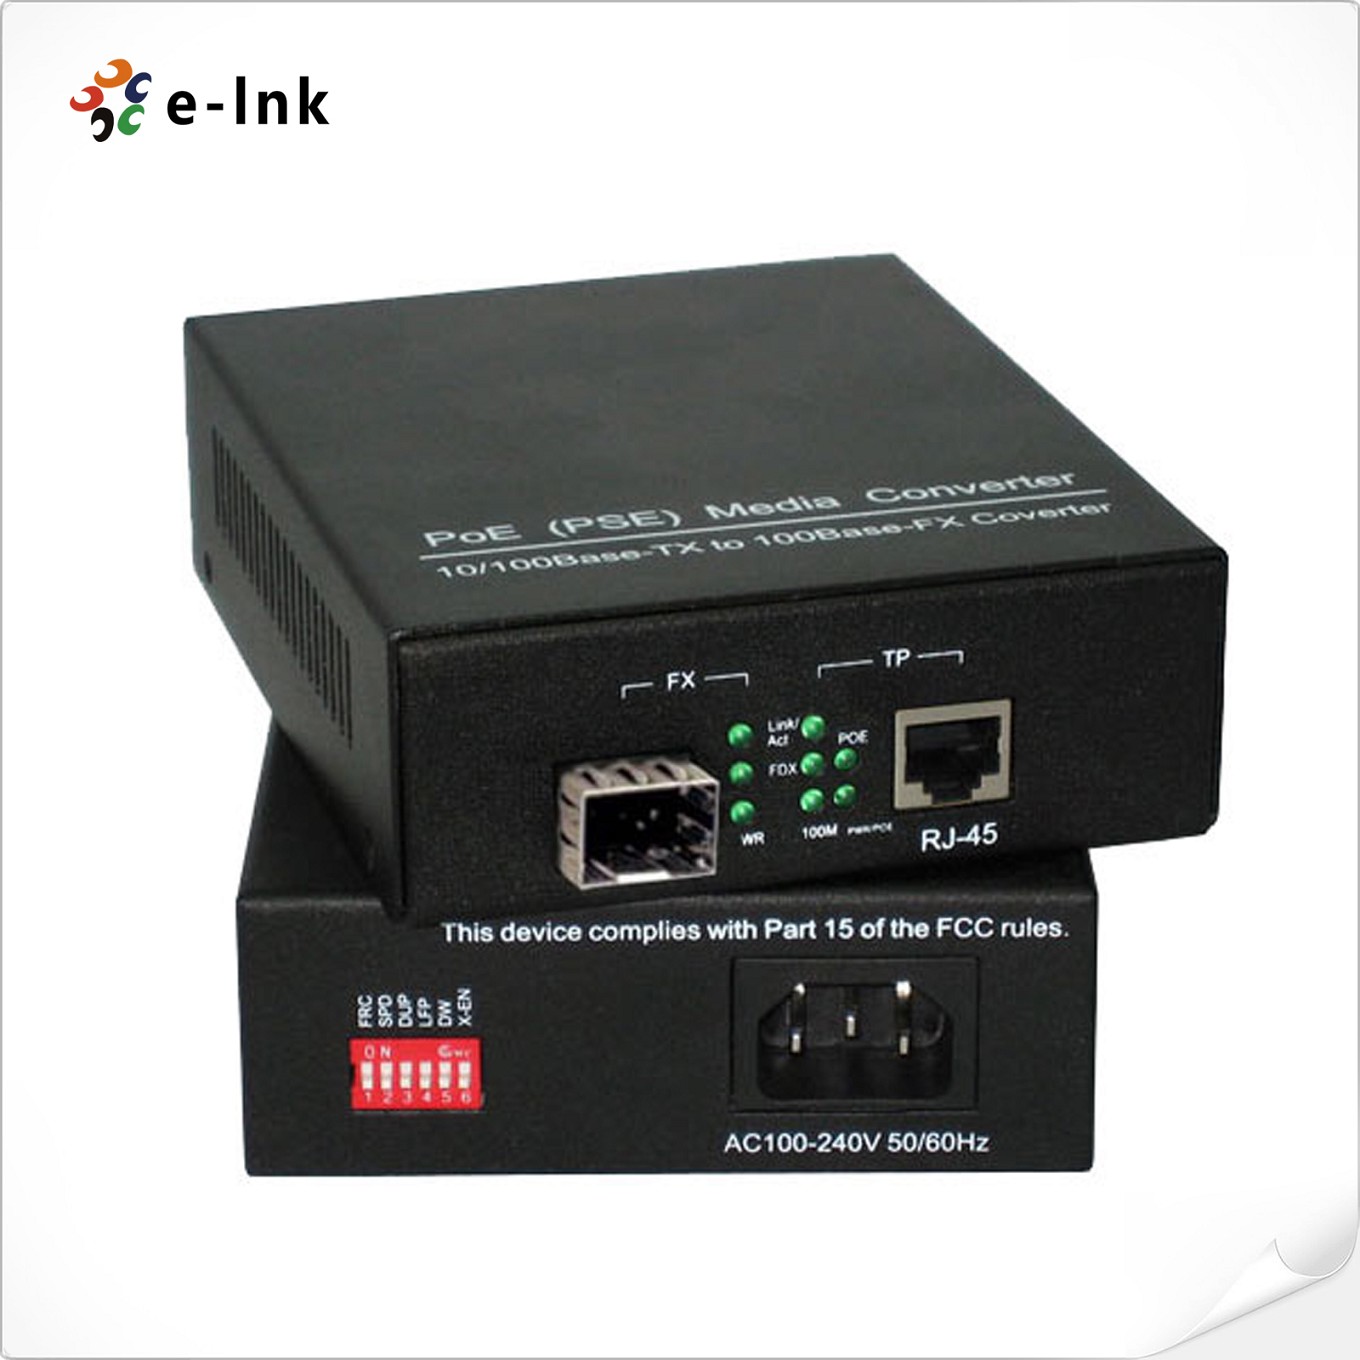 PoE(PSE) 10/100Base-TX to 100Base-FX Media Converter with built-in power supply